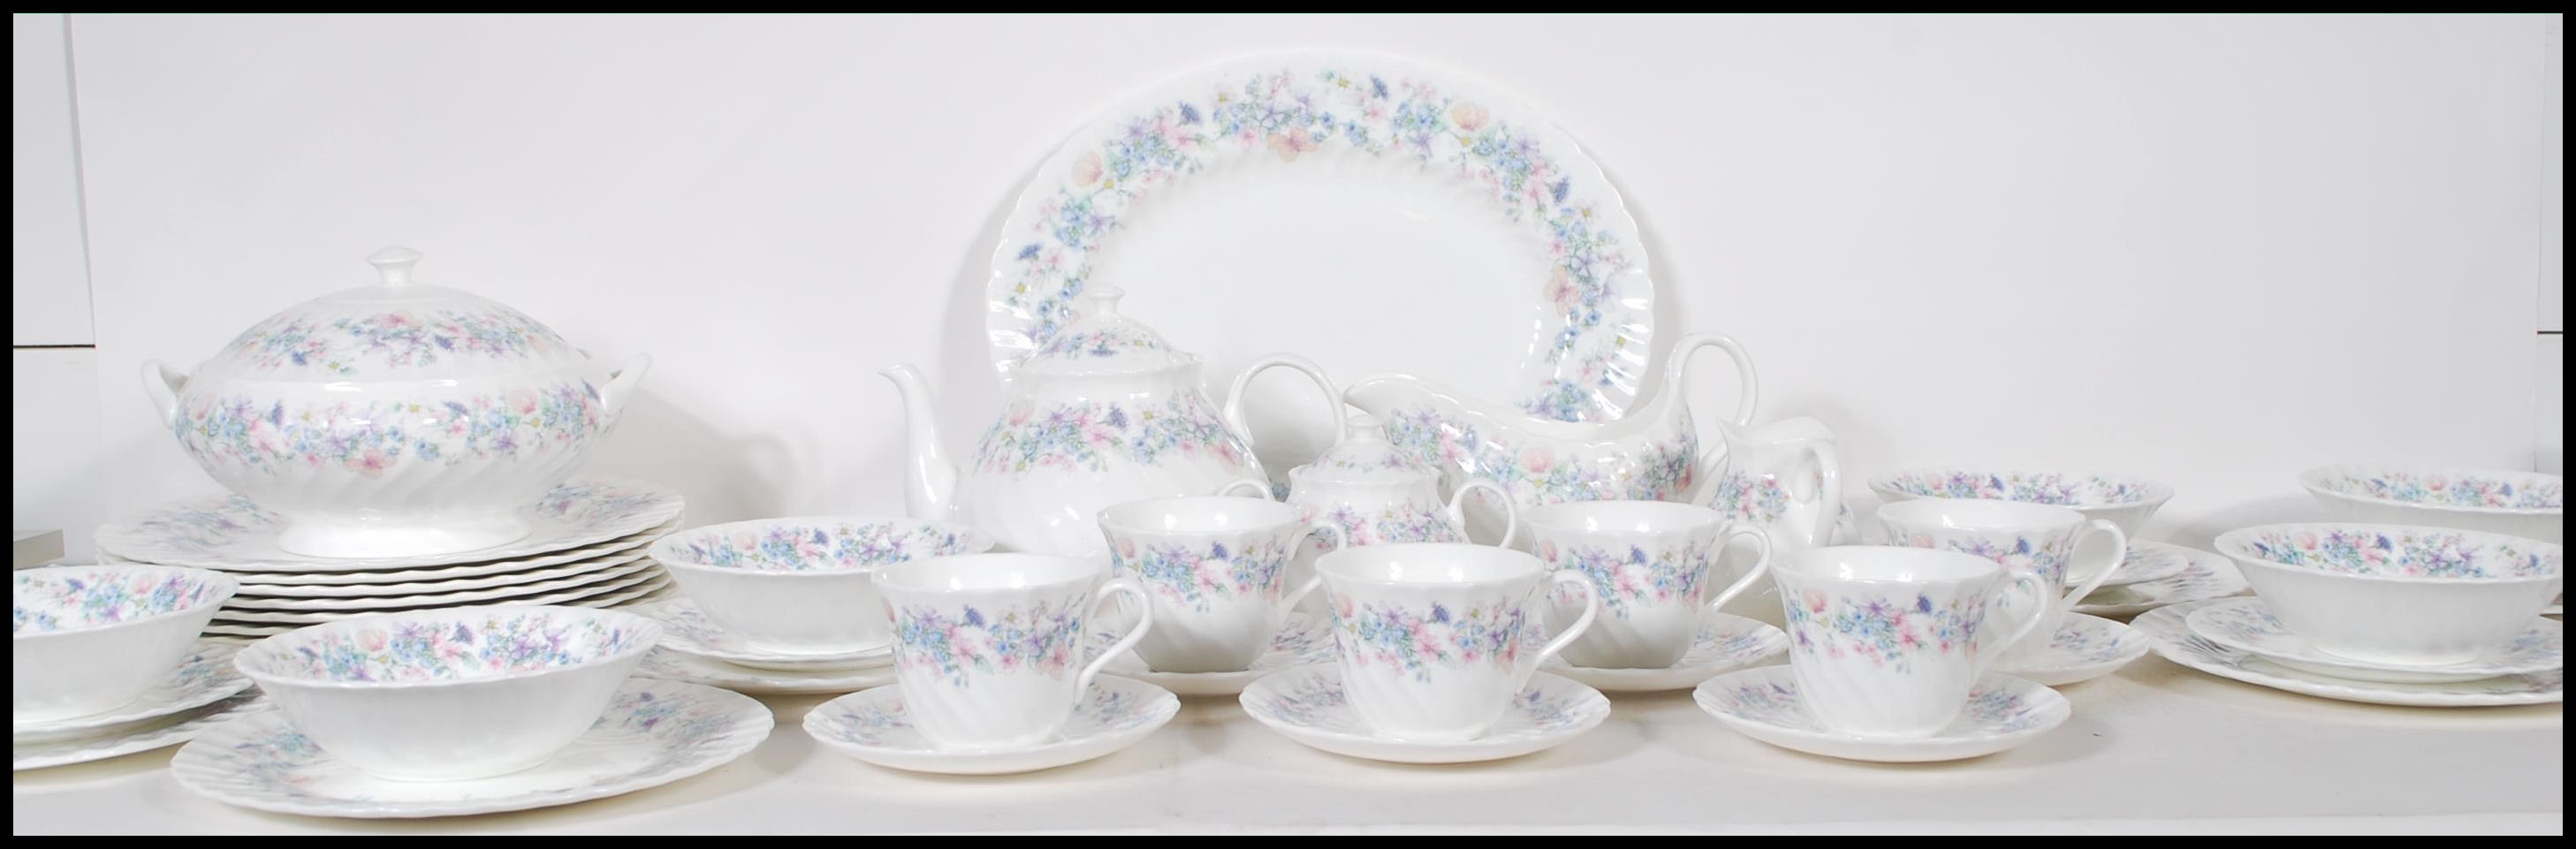 A vintage Wedgwood china tea / dinner service in the Angela pattern to include dinner plates, side